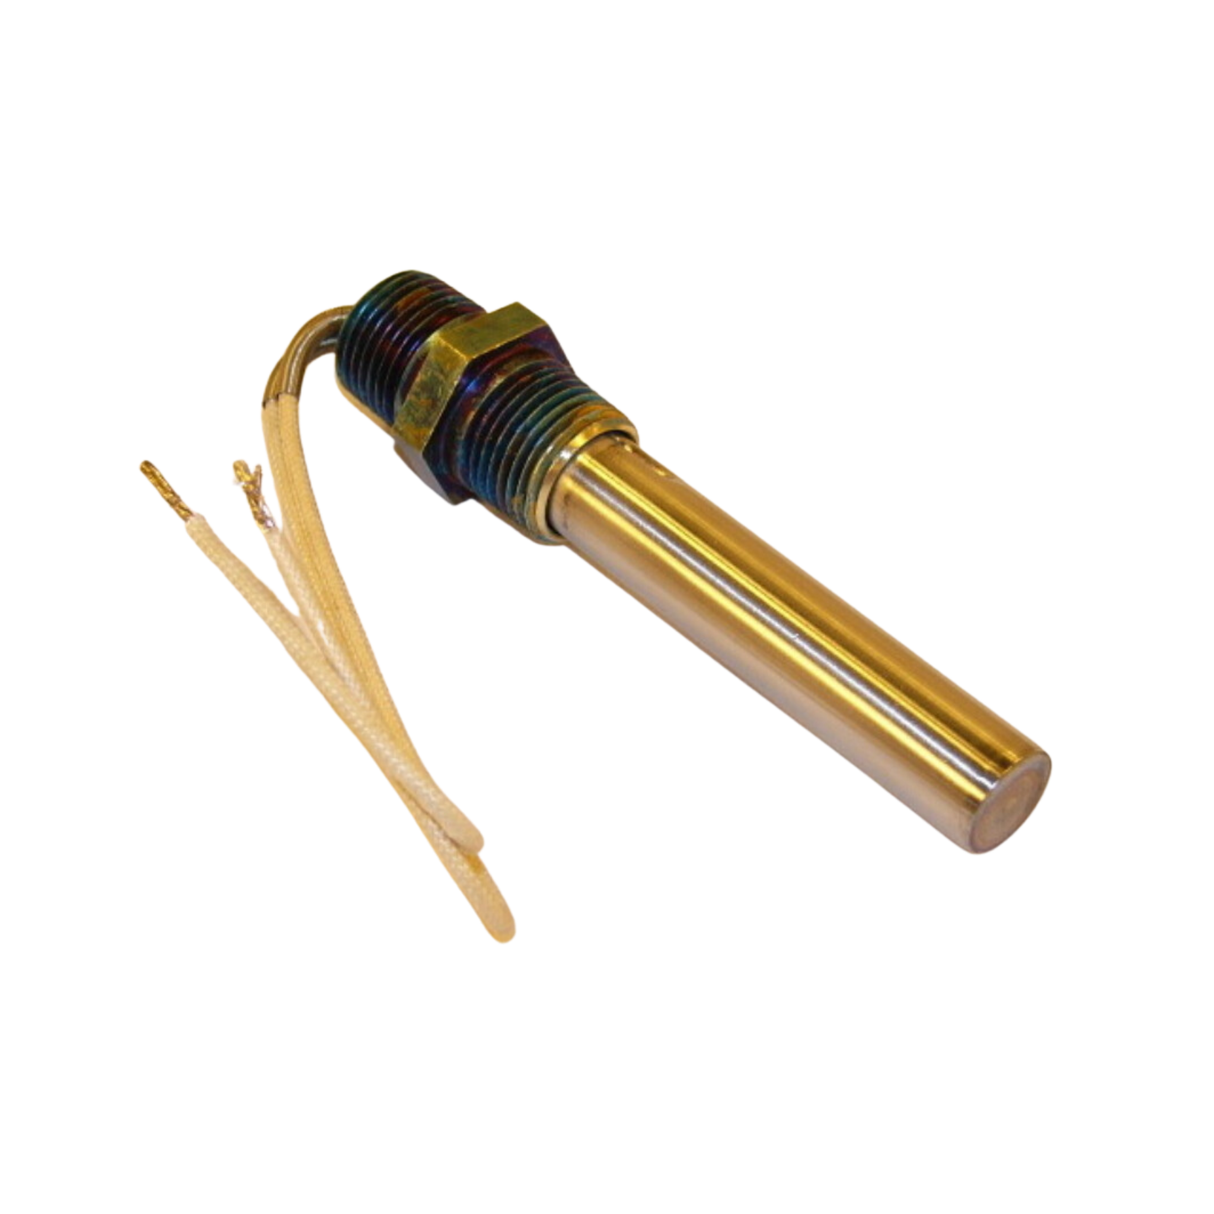 Fenwal 01-018002-000 300 Stainless Steel Shell, Brass Head, 0.625" Diameter Coupling Head, Thermoswitch Temperature Control with 8" Wire Leads, Part is Marked -100/400 for agency approval